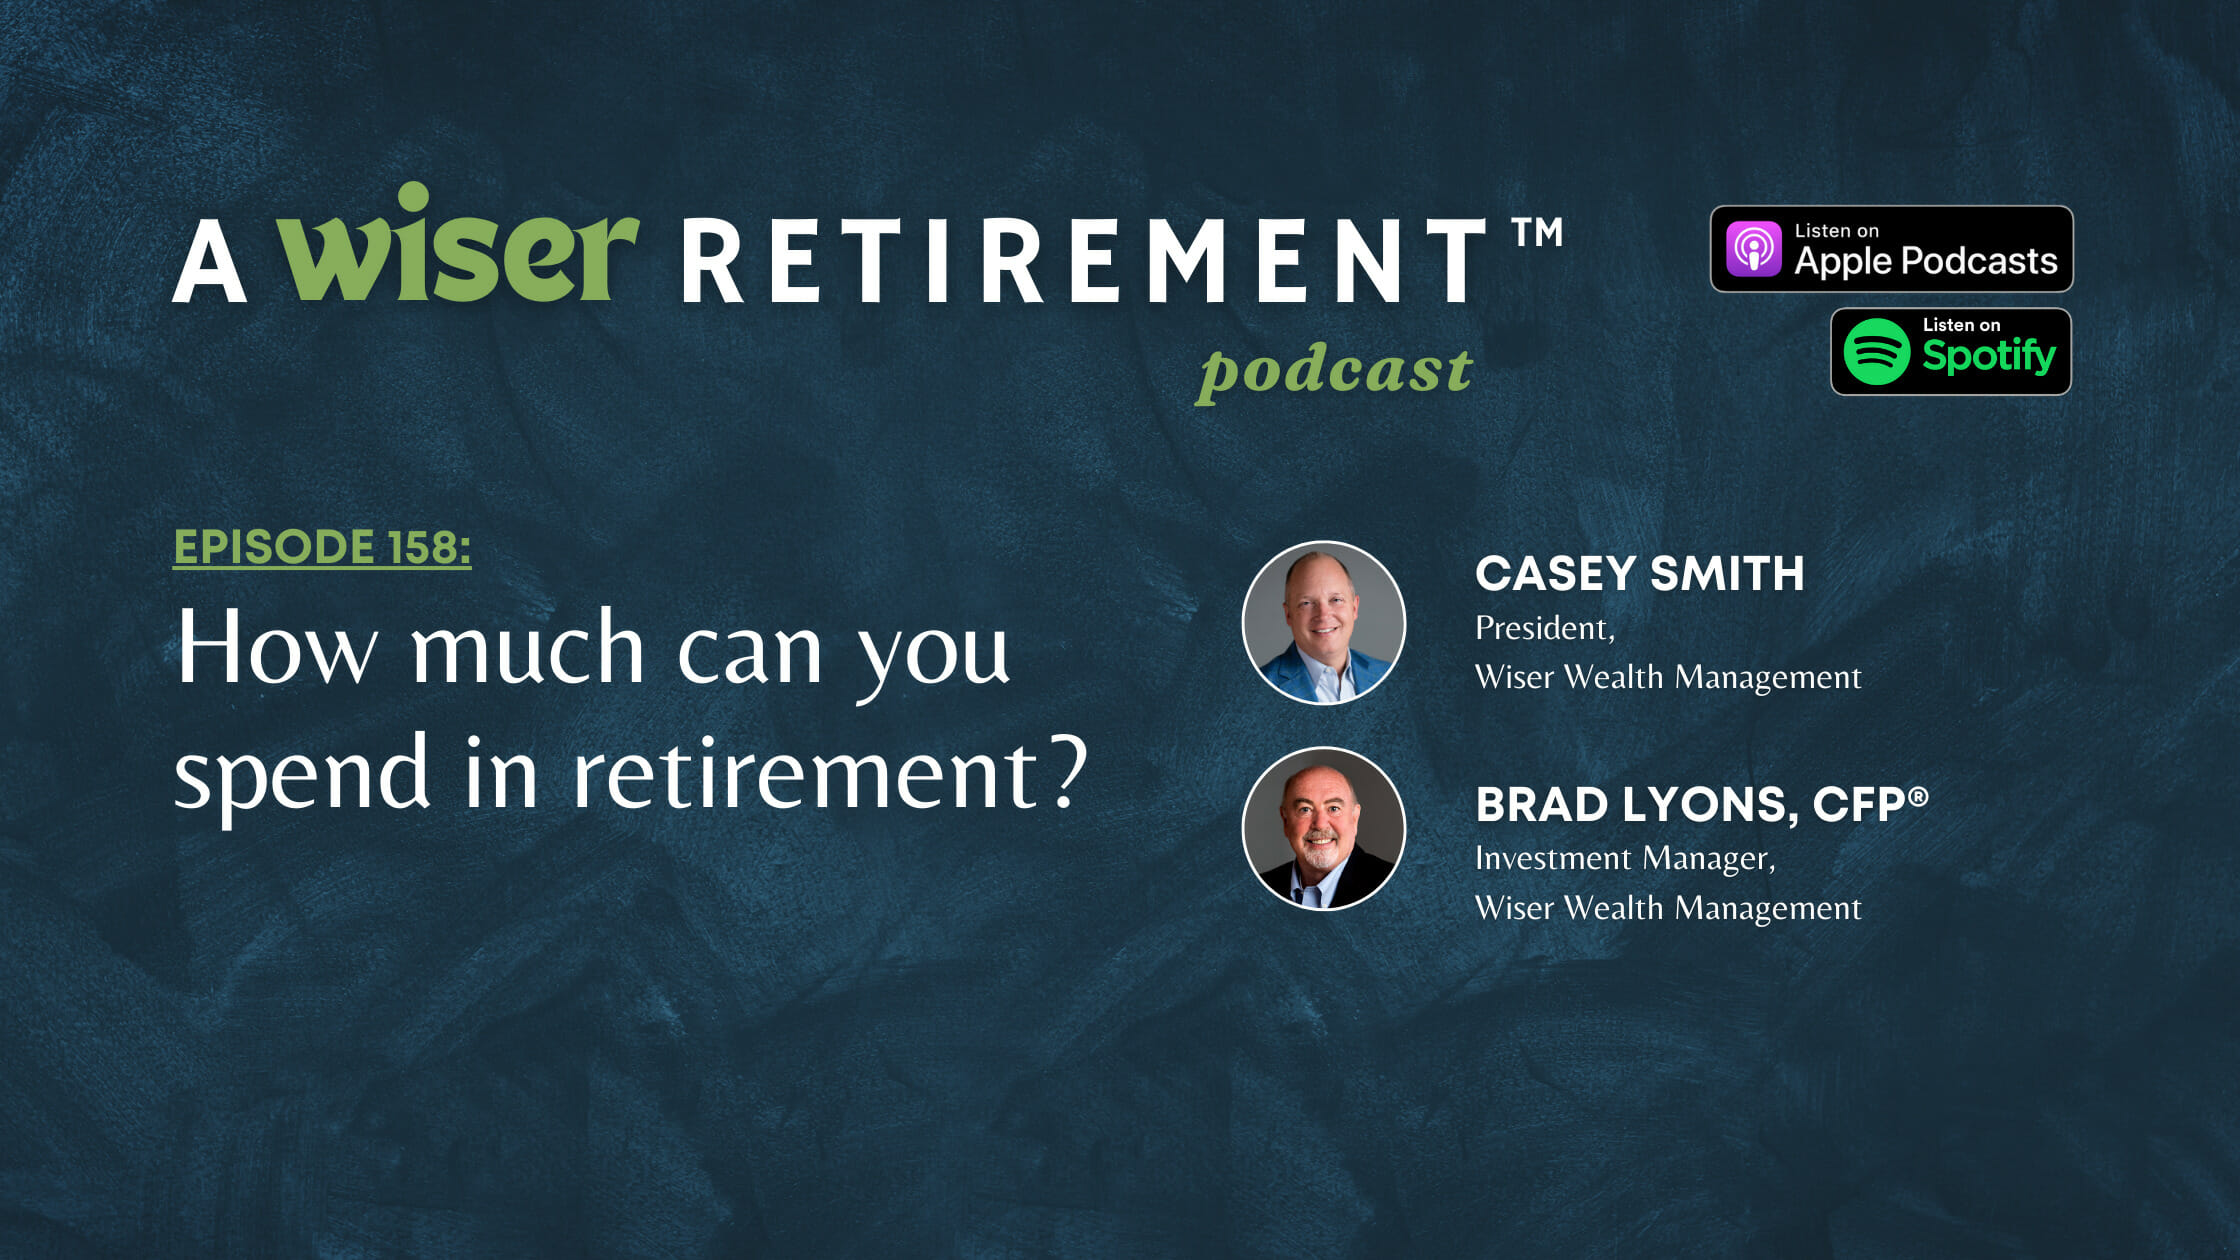 How much can you spend in retirement?